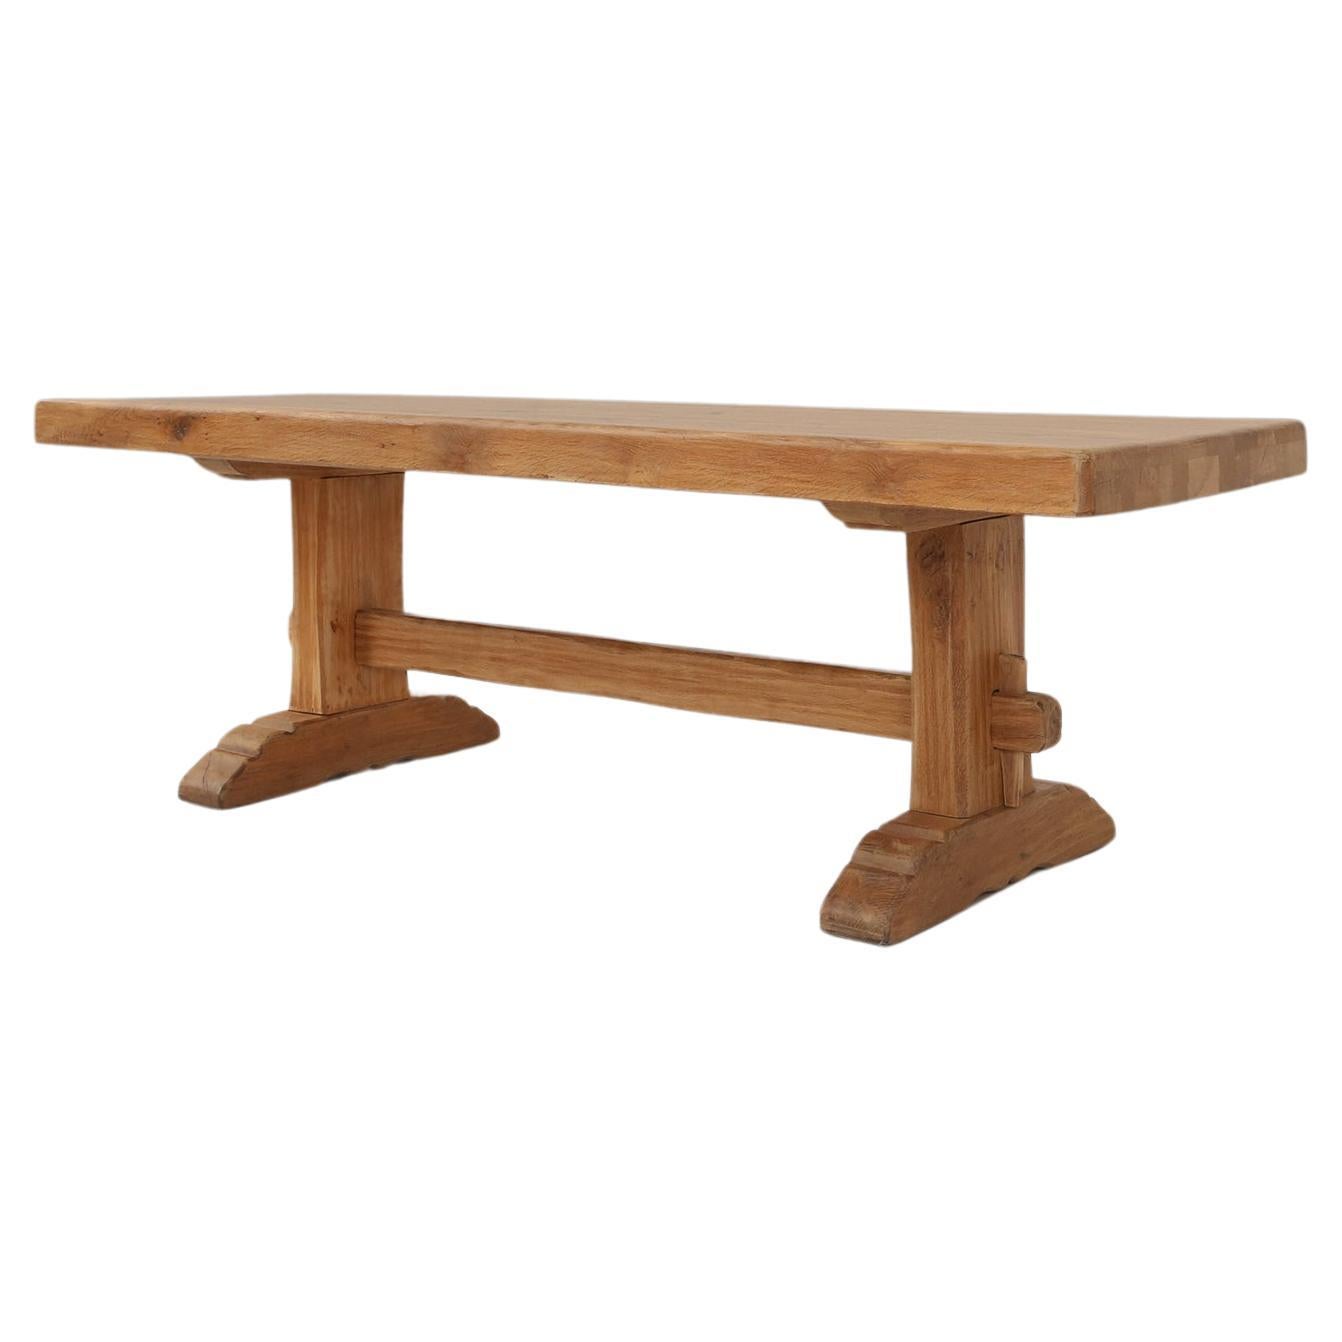 French Rustic Wooden Dining Table, 1950s For Sale